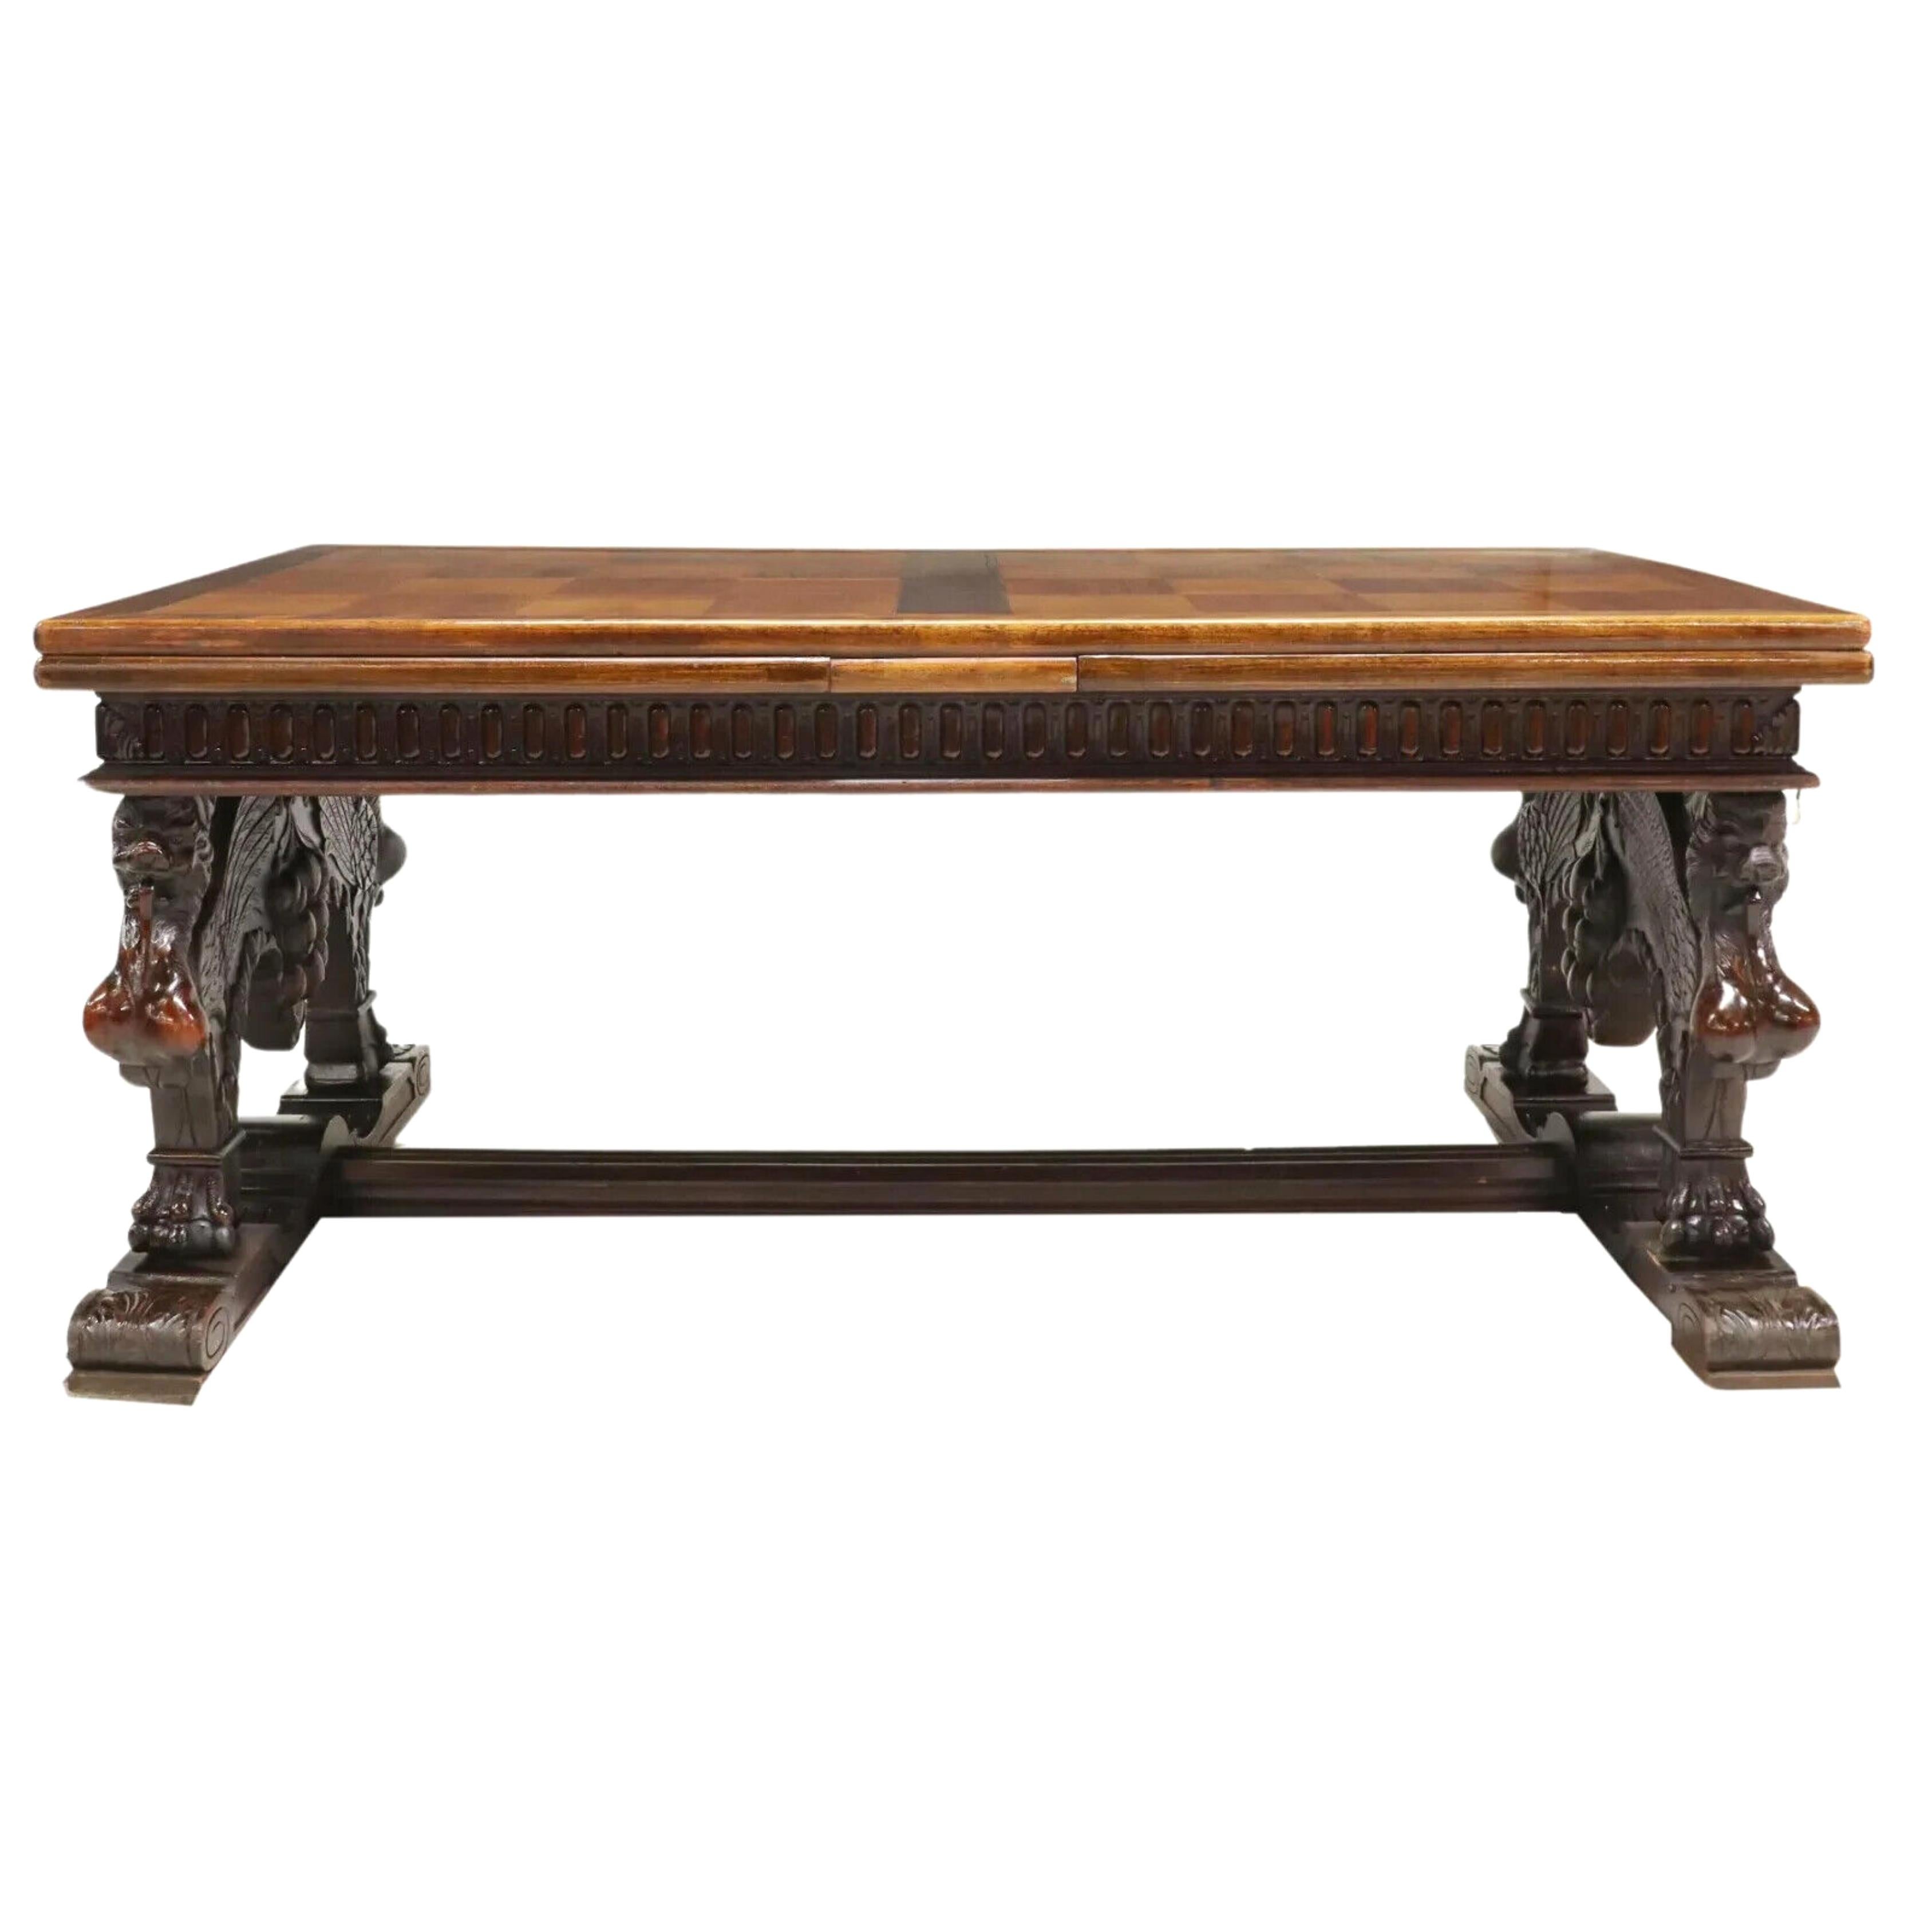 Early 1900's Antique Dining, Renaissance Revival, Carved, Draw-Leaf Table!!

Antique Table, Dining, Renaissance Revival,  Carved,  Draw-Leaf, Early 1900s, 20th Century!!

This beautiful antique dining table is a true gem that will add a touch of